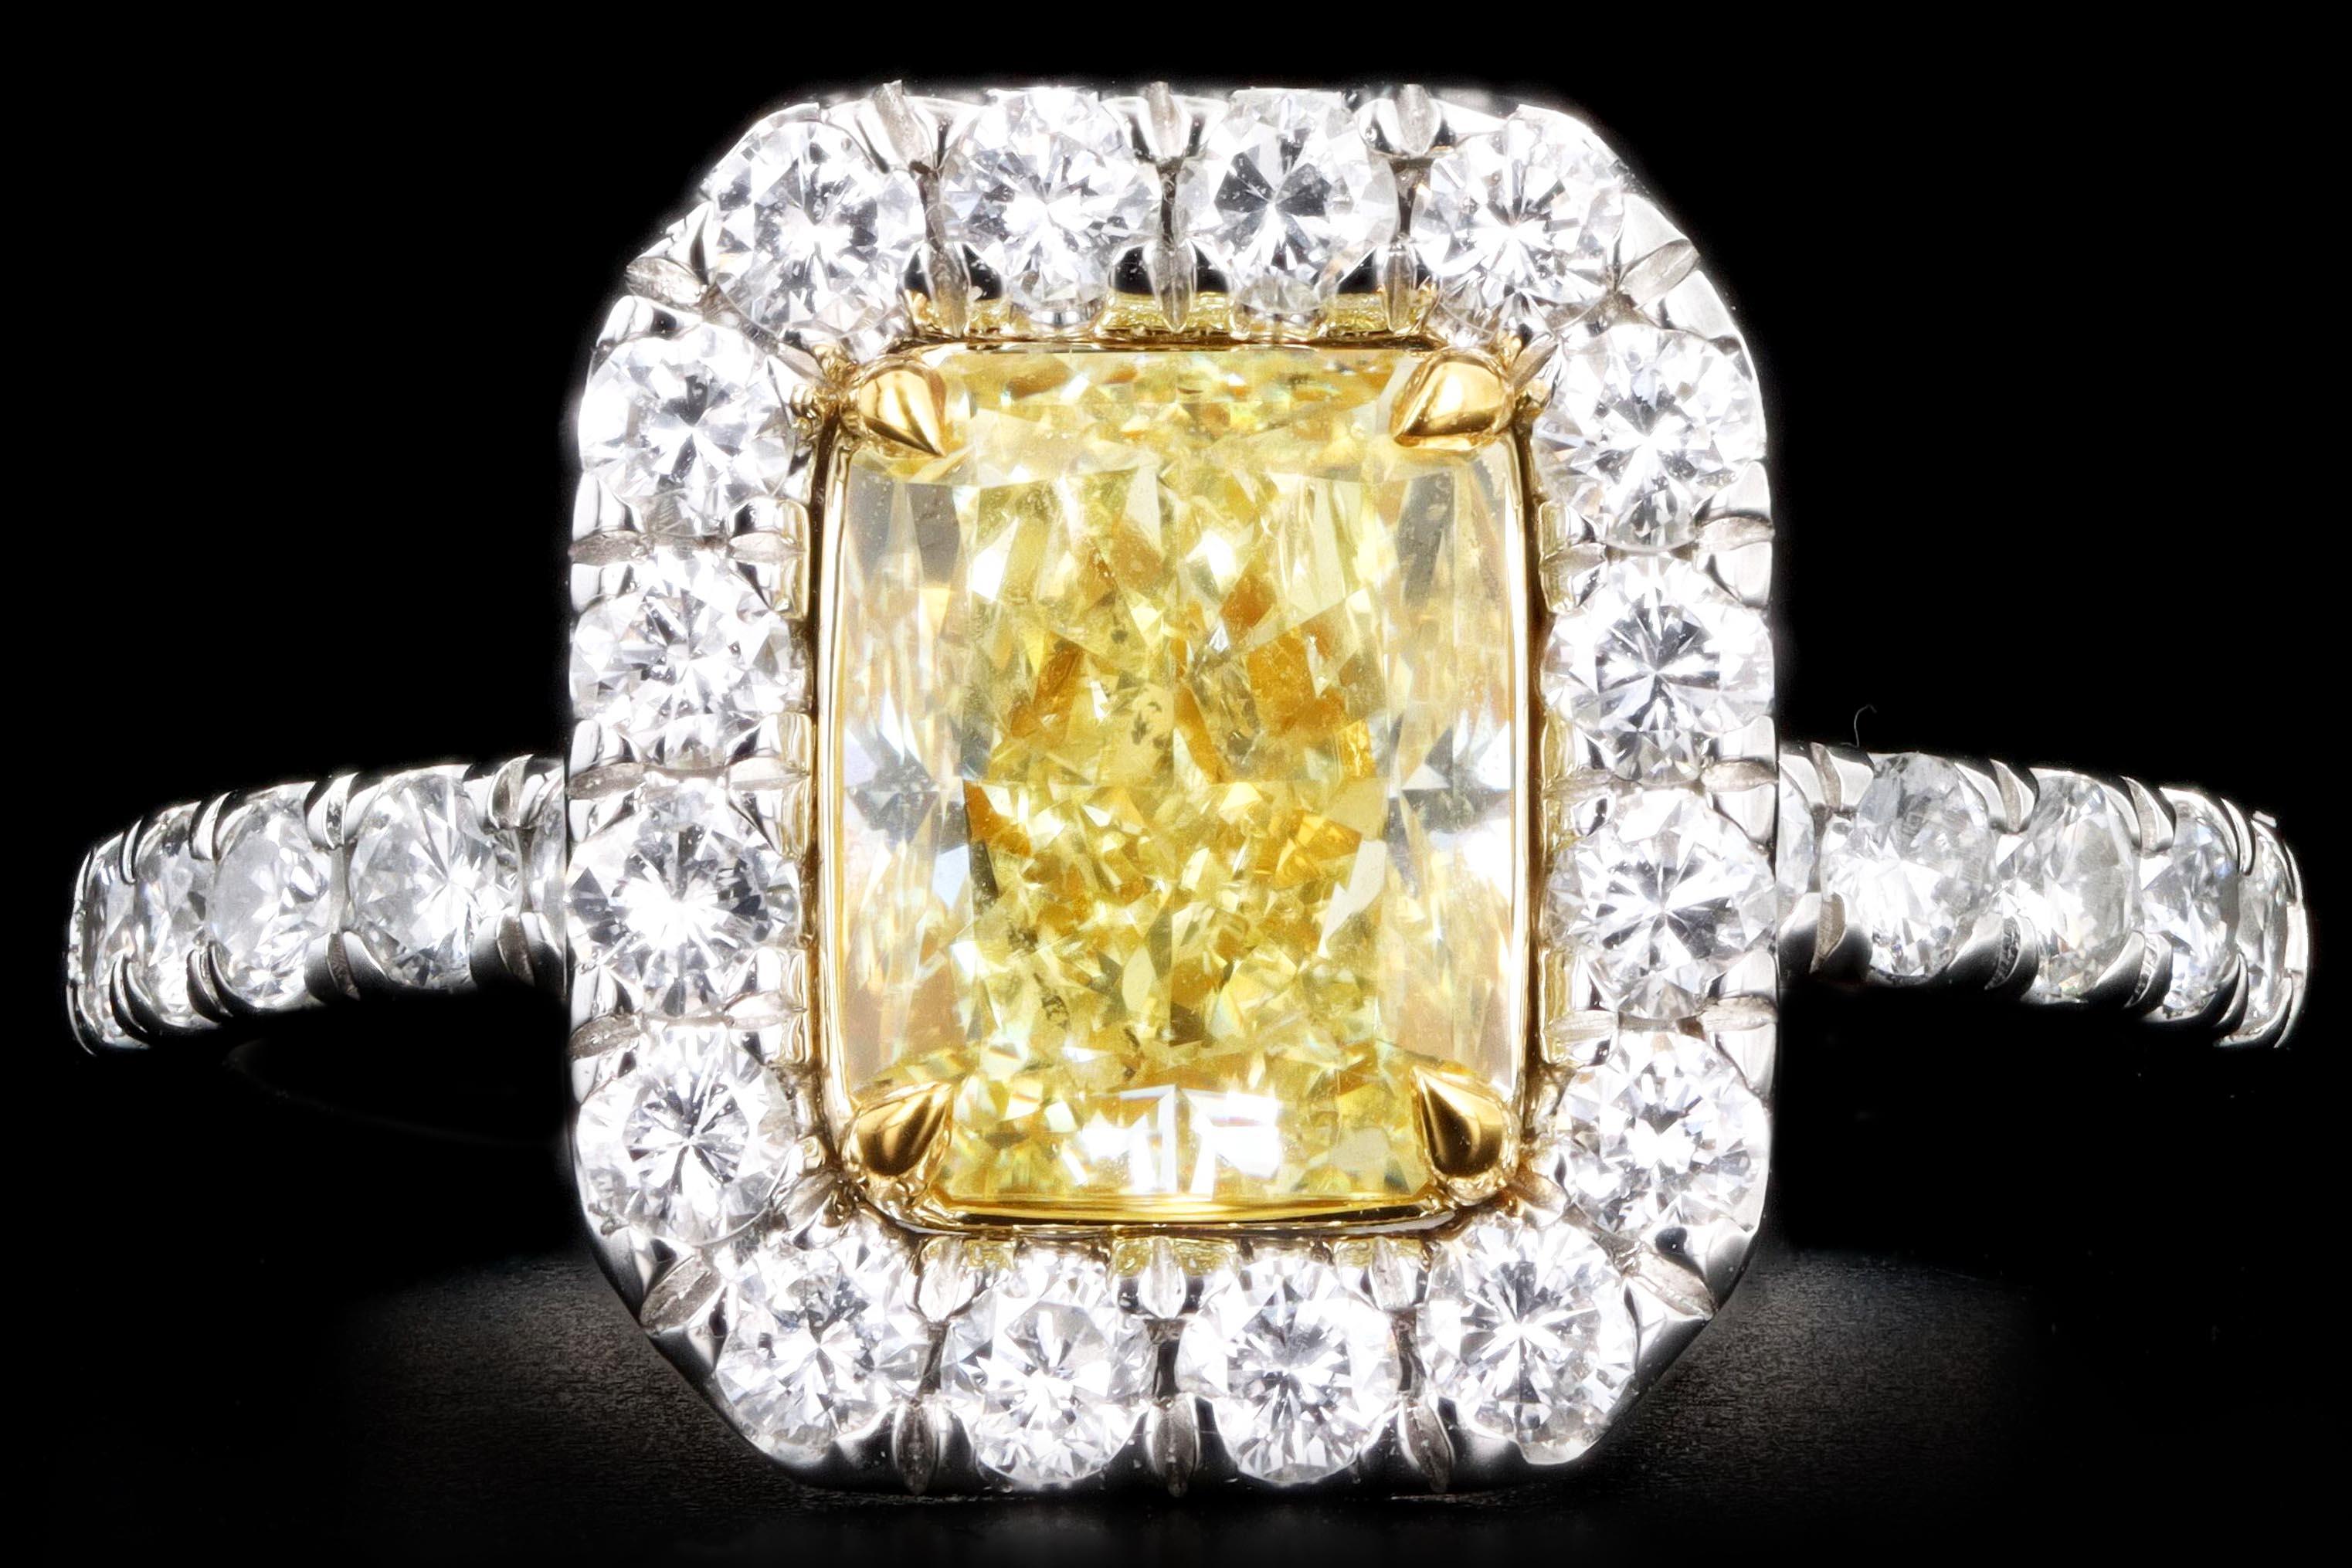 Era: New

Composition: Platinum

Primary Stone: Radiant Cut Diamond

Carat Weight: 1.73 Carats

Color: Natural, Fancy Yellow

Accent Stones: 28 Round Brilliant Cut Diamonds

Carat Weight: .75 Carats

Color: G-H

Clarity: Vs1/2

Total Carat Weight: